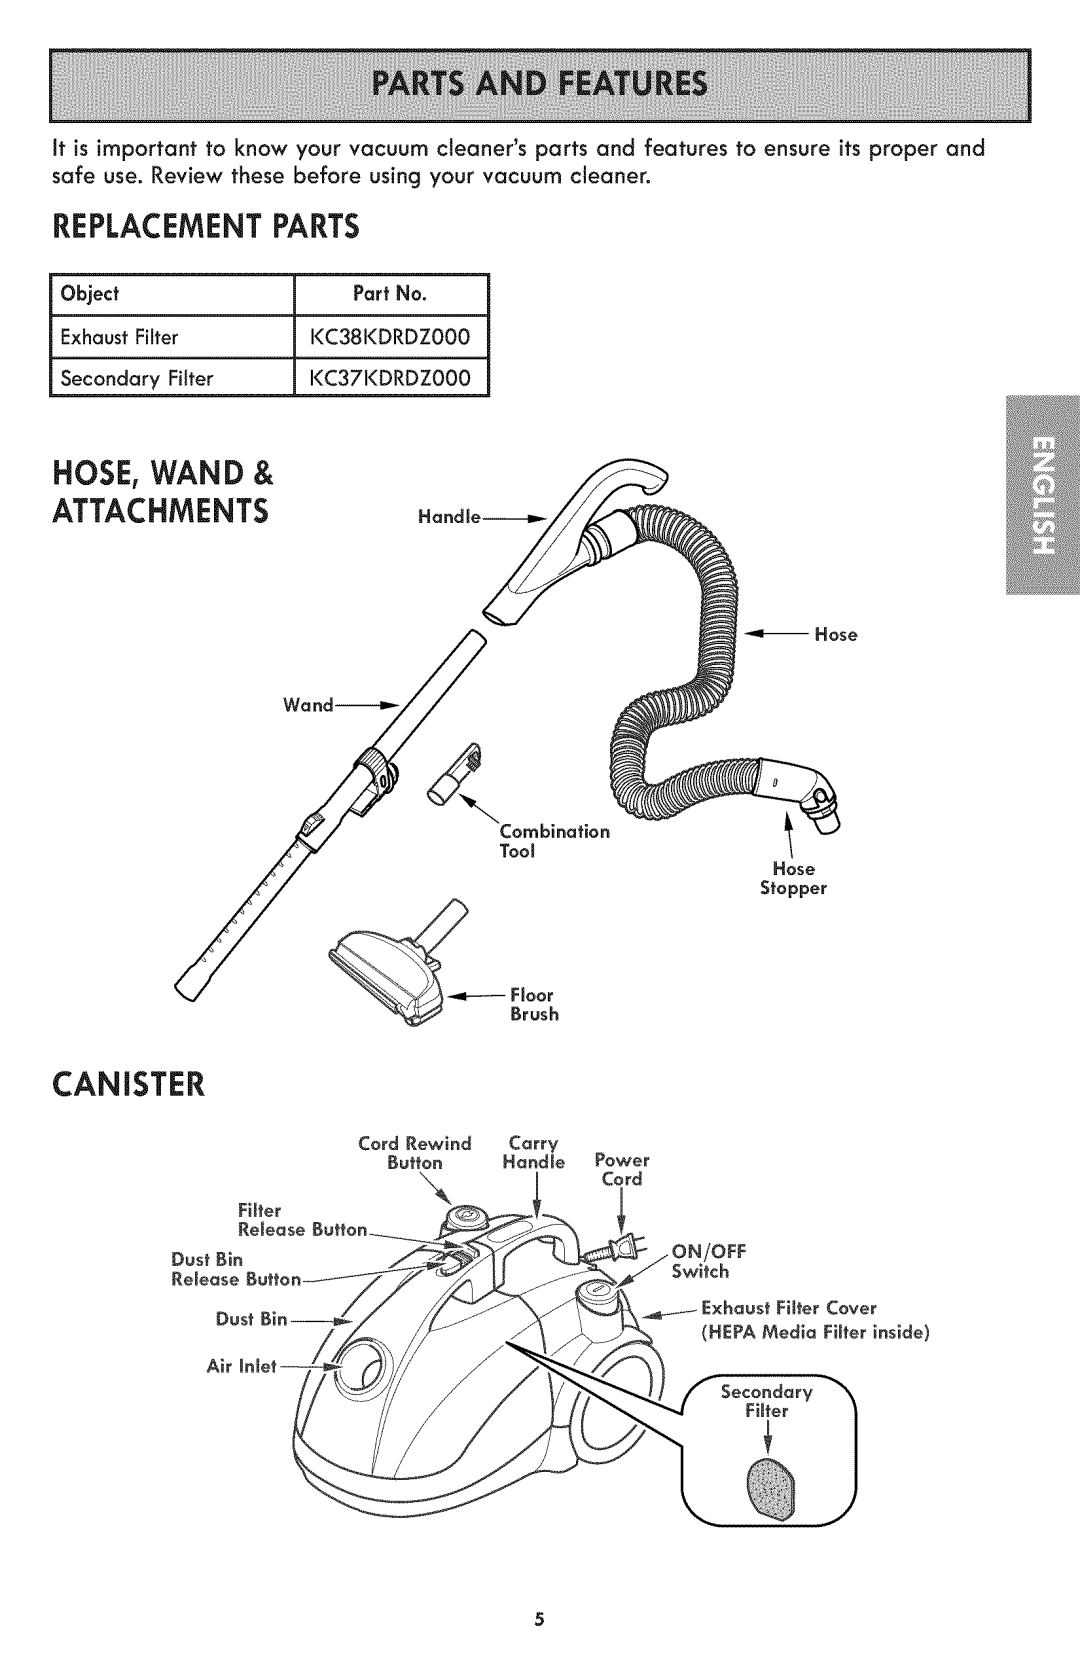 Kenmore 116.24194 manual Replacement Parts, Hose, Wand, Attachments, Canister, Cord Rewind Carr¥, Button Handle Power 